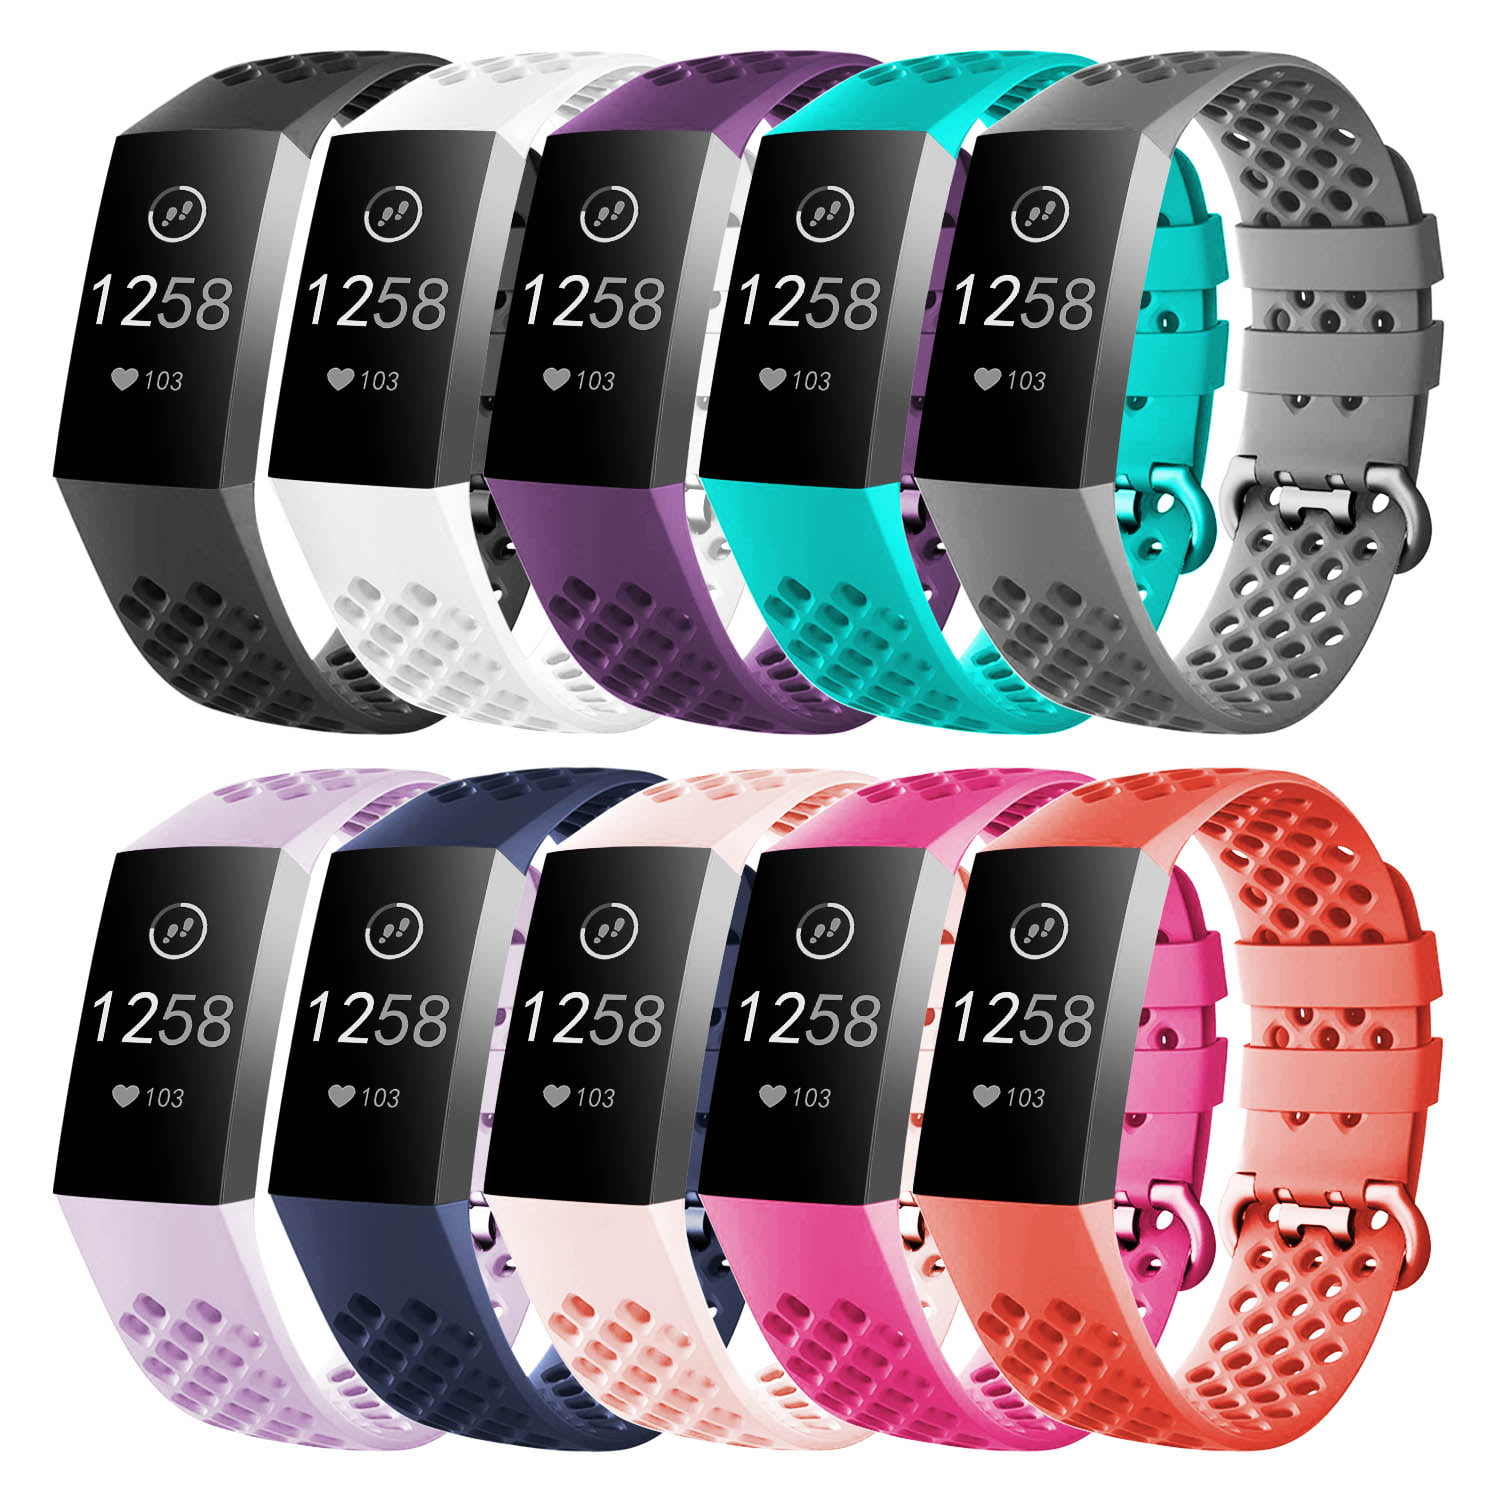 Luxmo - Luxmo 10-Pack Fitbit Charge 3 